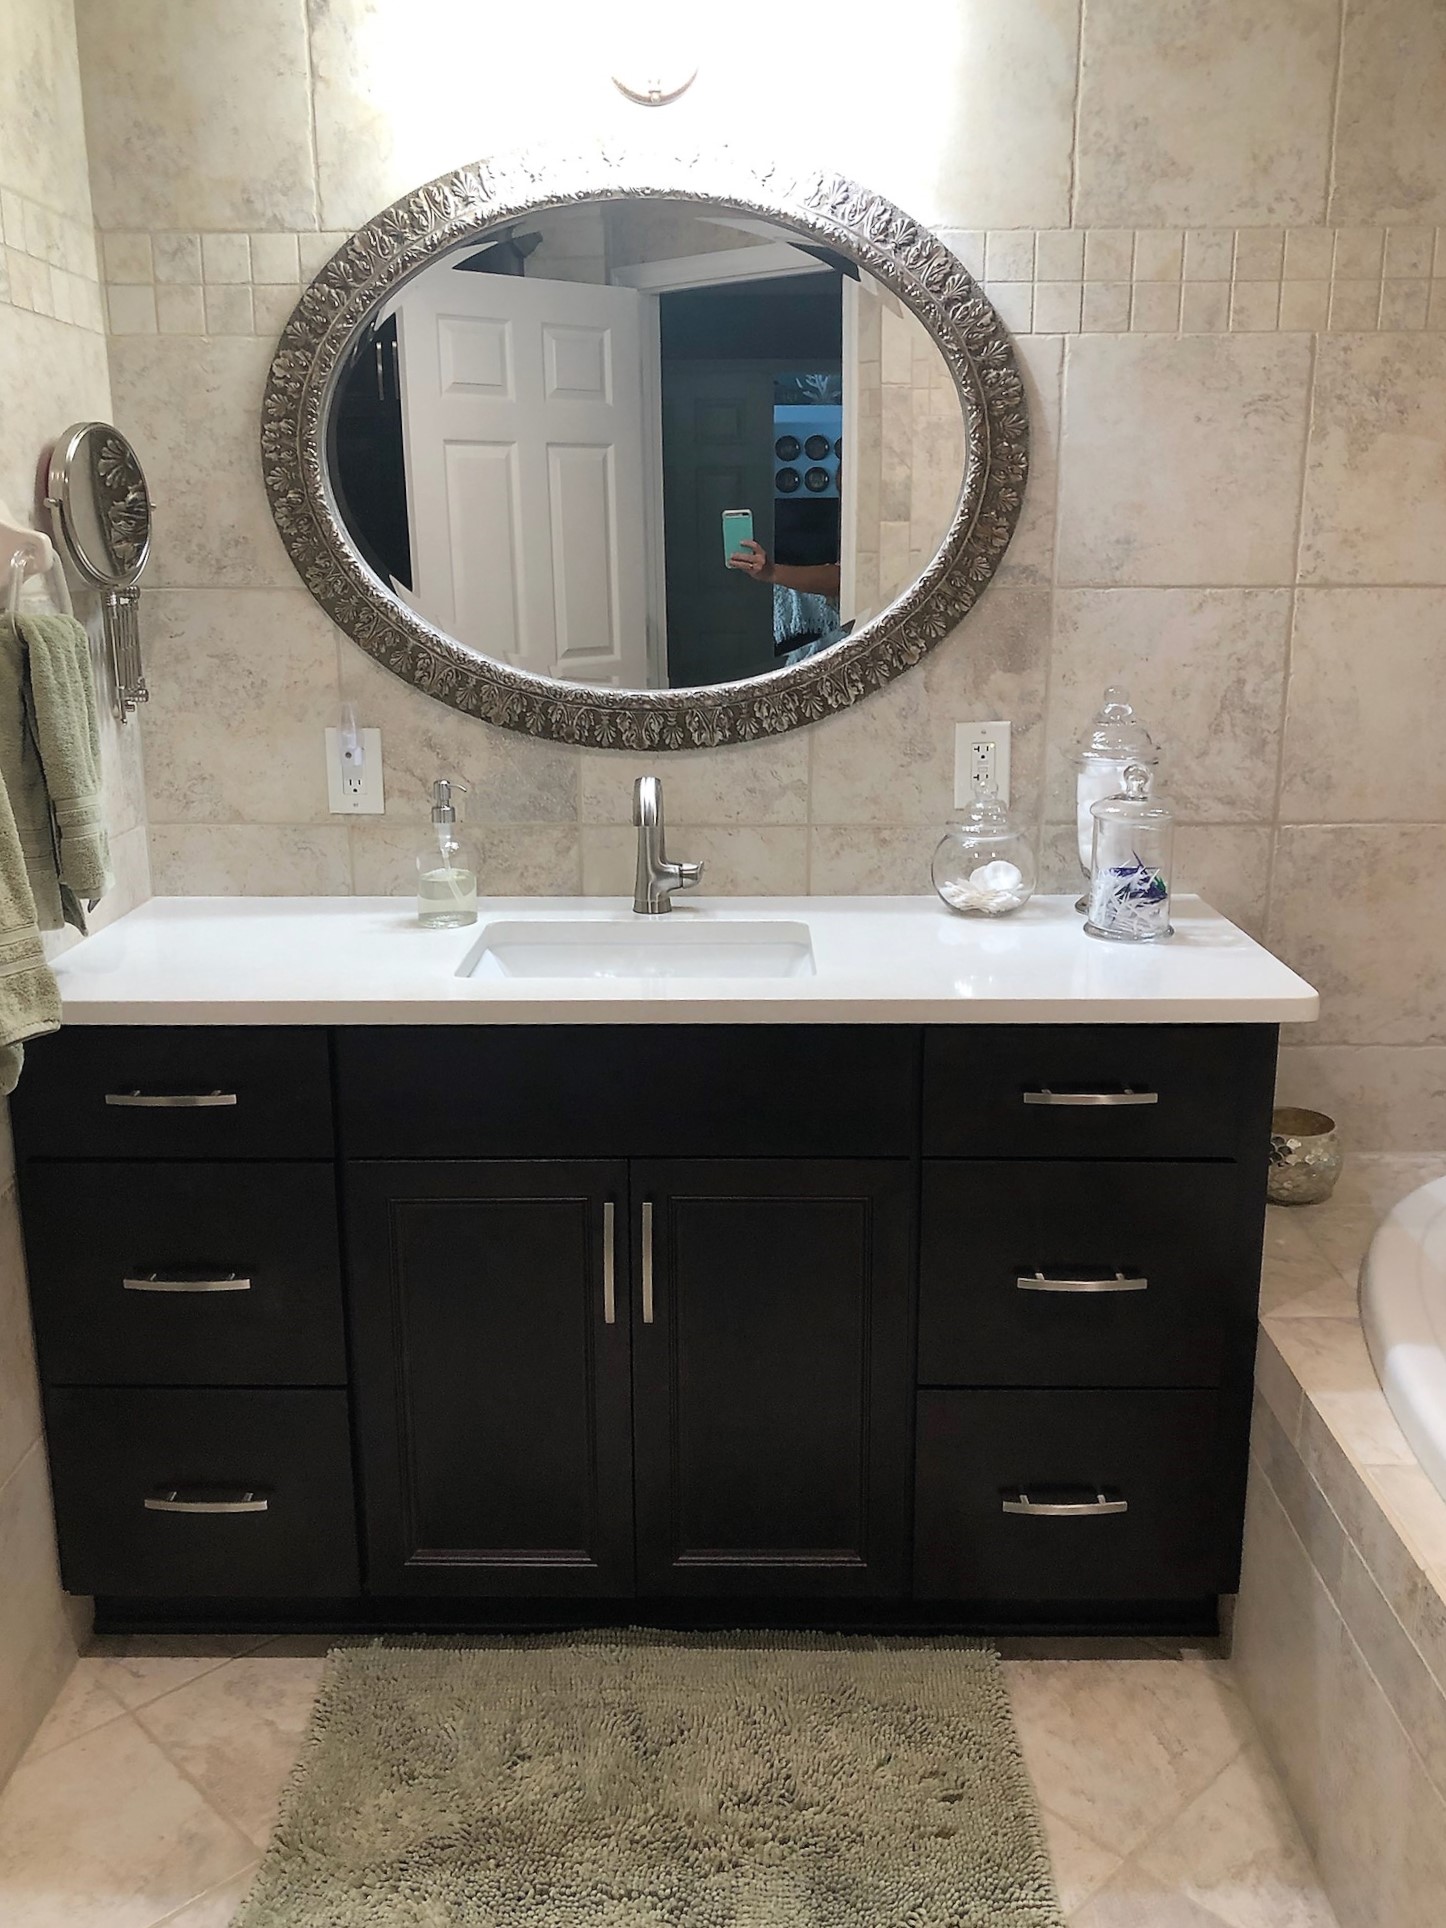 Single painted chocolate vanity featuring a White Mist Quartz countertop and beautifully framed oval mirror.